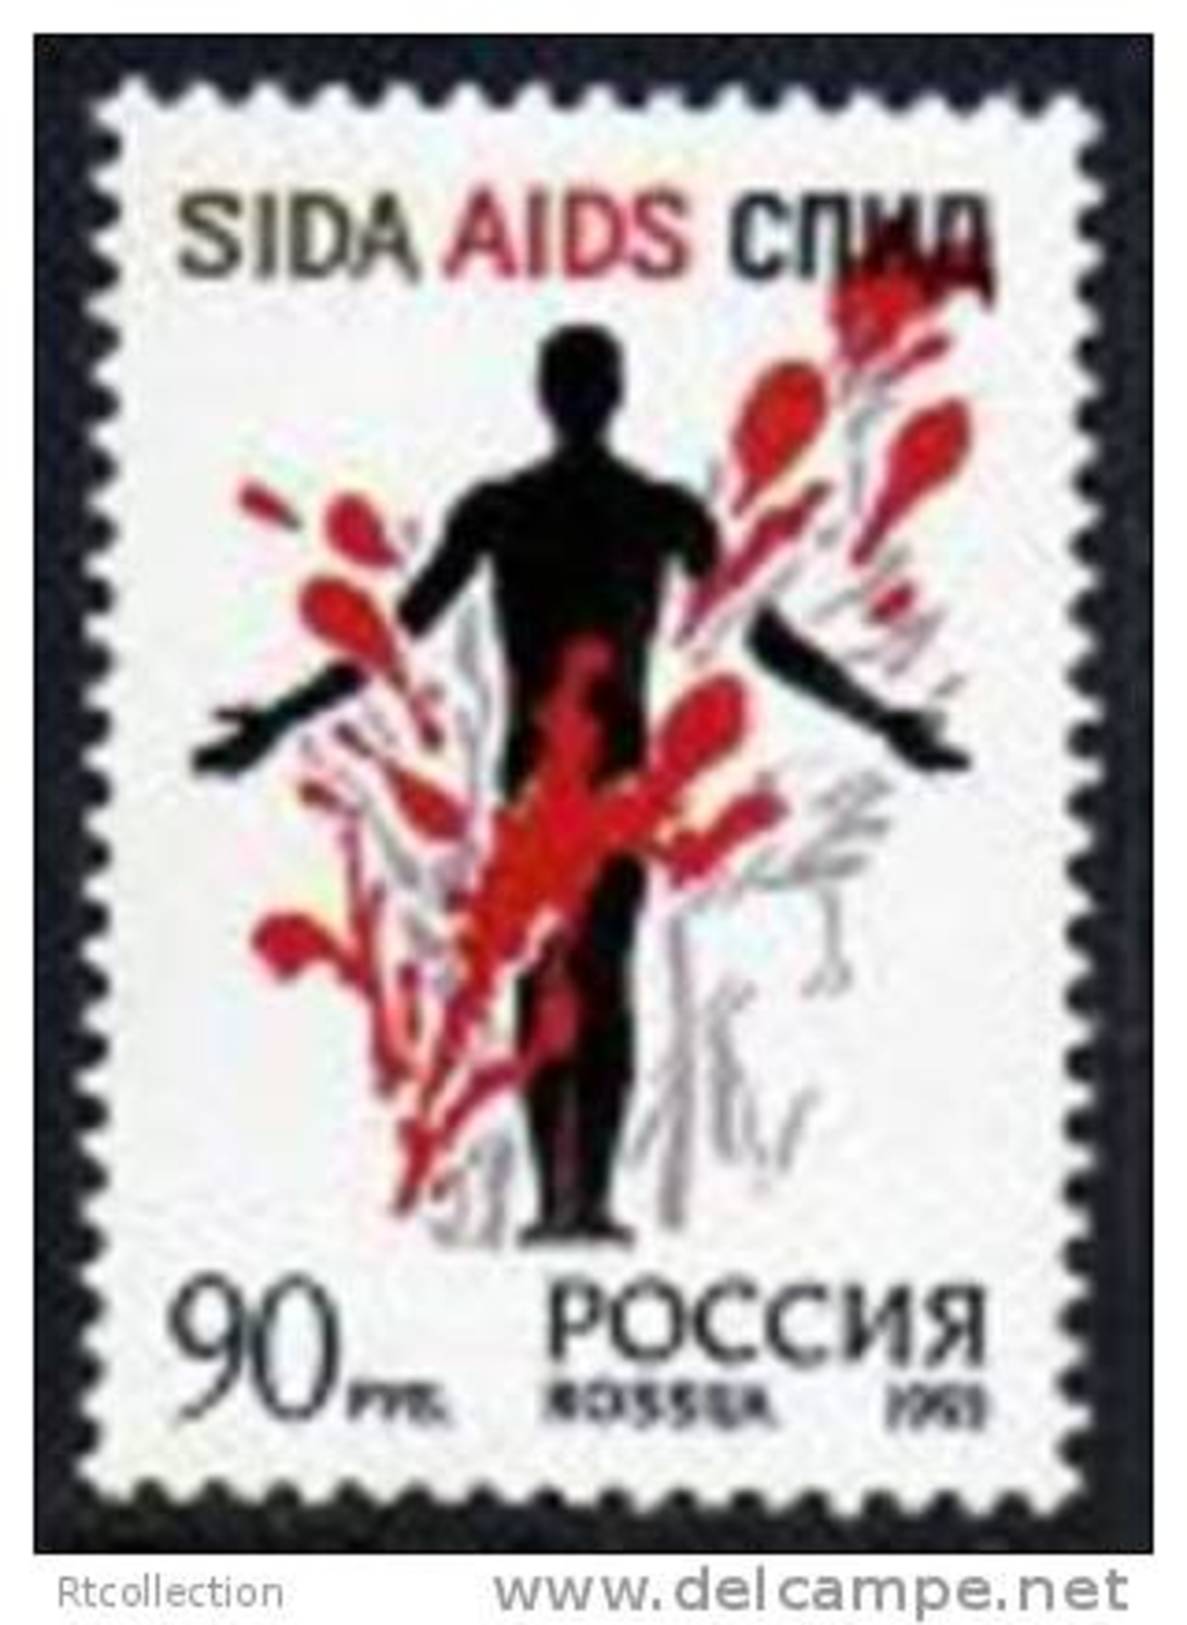 USSR Russia 1993 - One Health Prevention Of  AIDS / Fight Against Aids Blood Disease Stamp MNH Michel 347 Russia 6183 - Collezioni